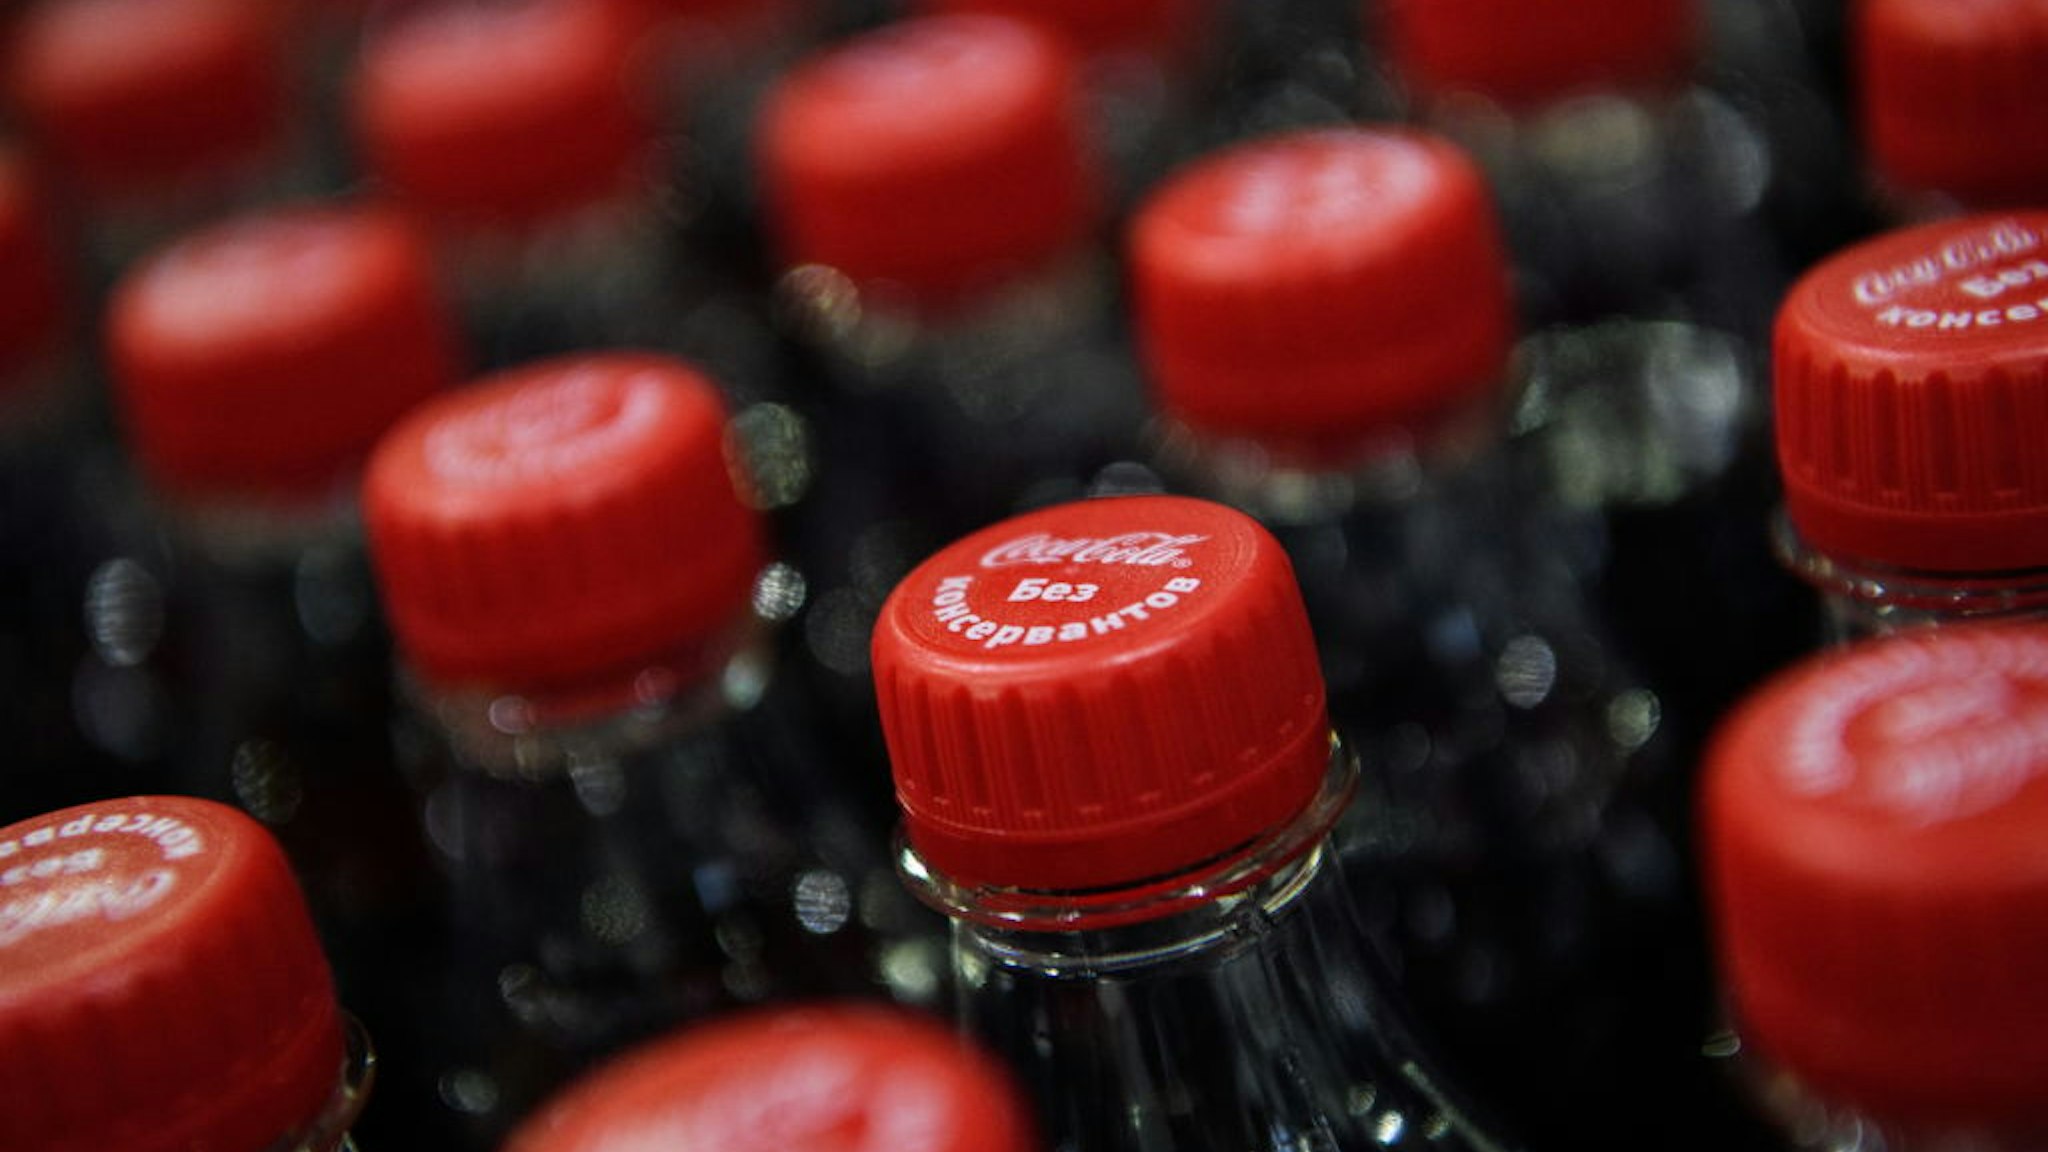 YEKATERINBURG, RUSSIA - APRIL 6, 2017: Coca-Cola bottles on the production line at the Coca-Cola HBC Russia plant in Yekaterinburg. Donat Sorokin/TASS (Photo by Donat SorokinTASS via Getty Images)